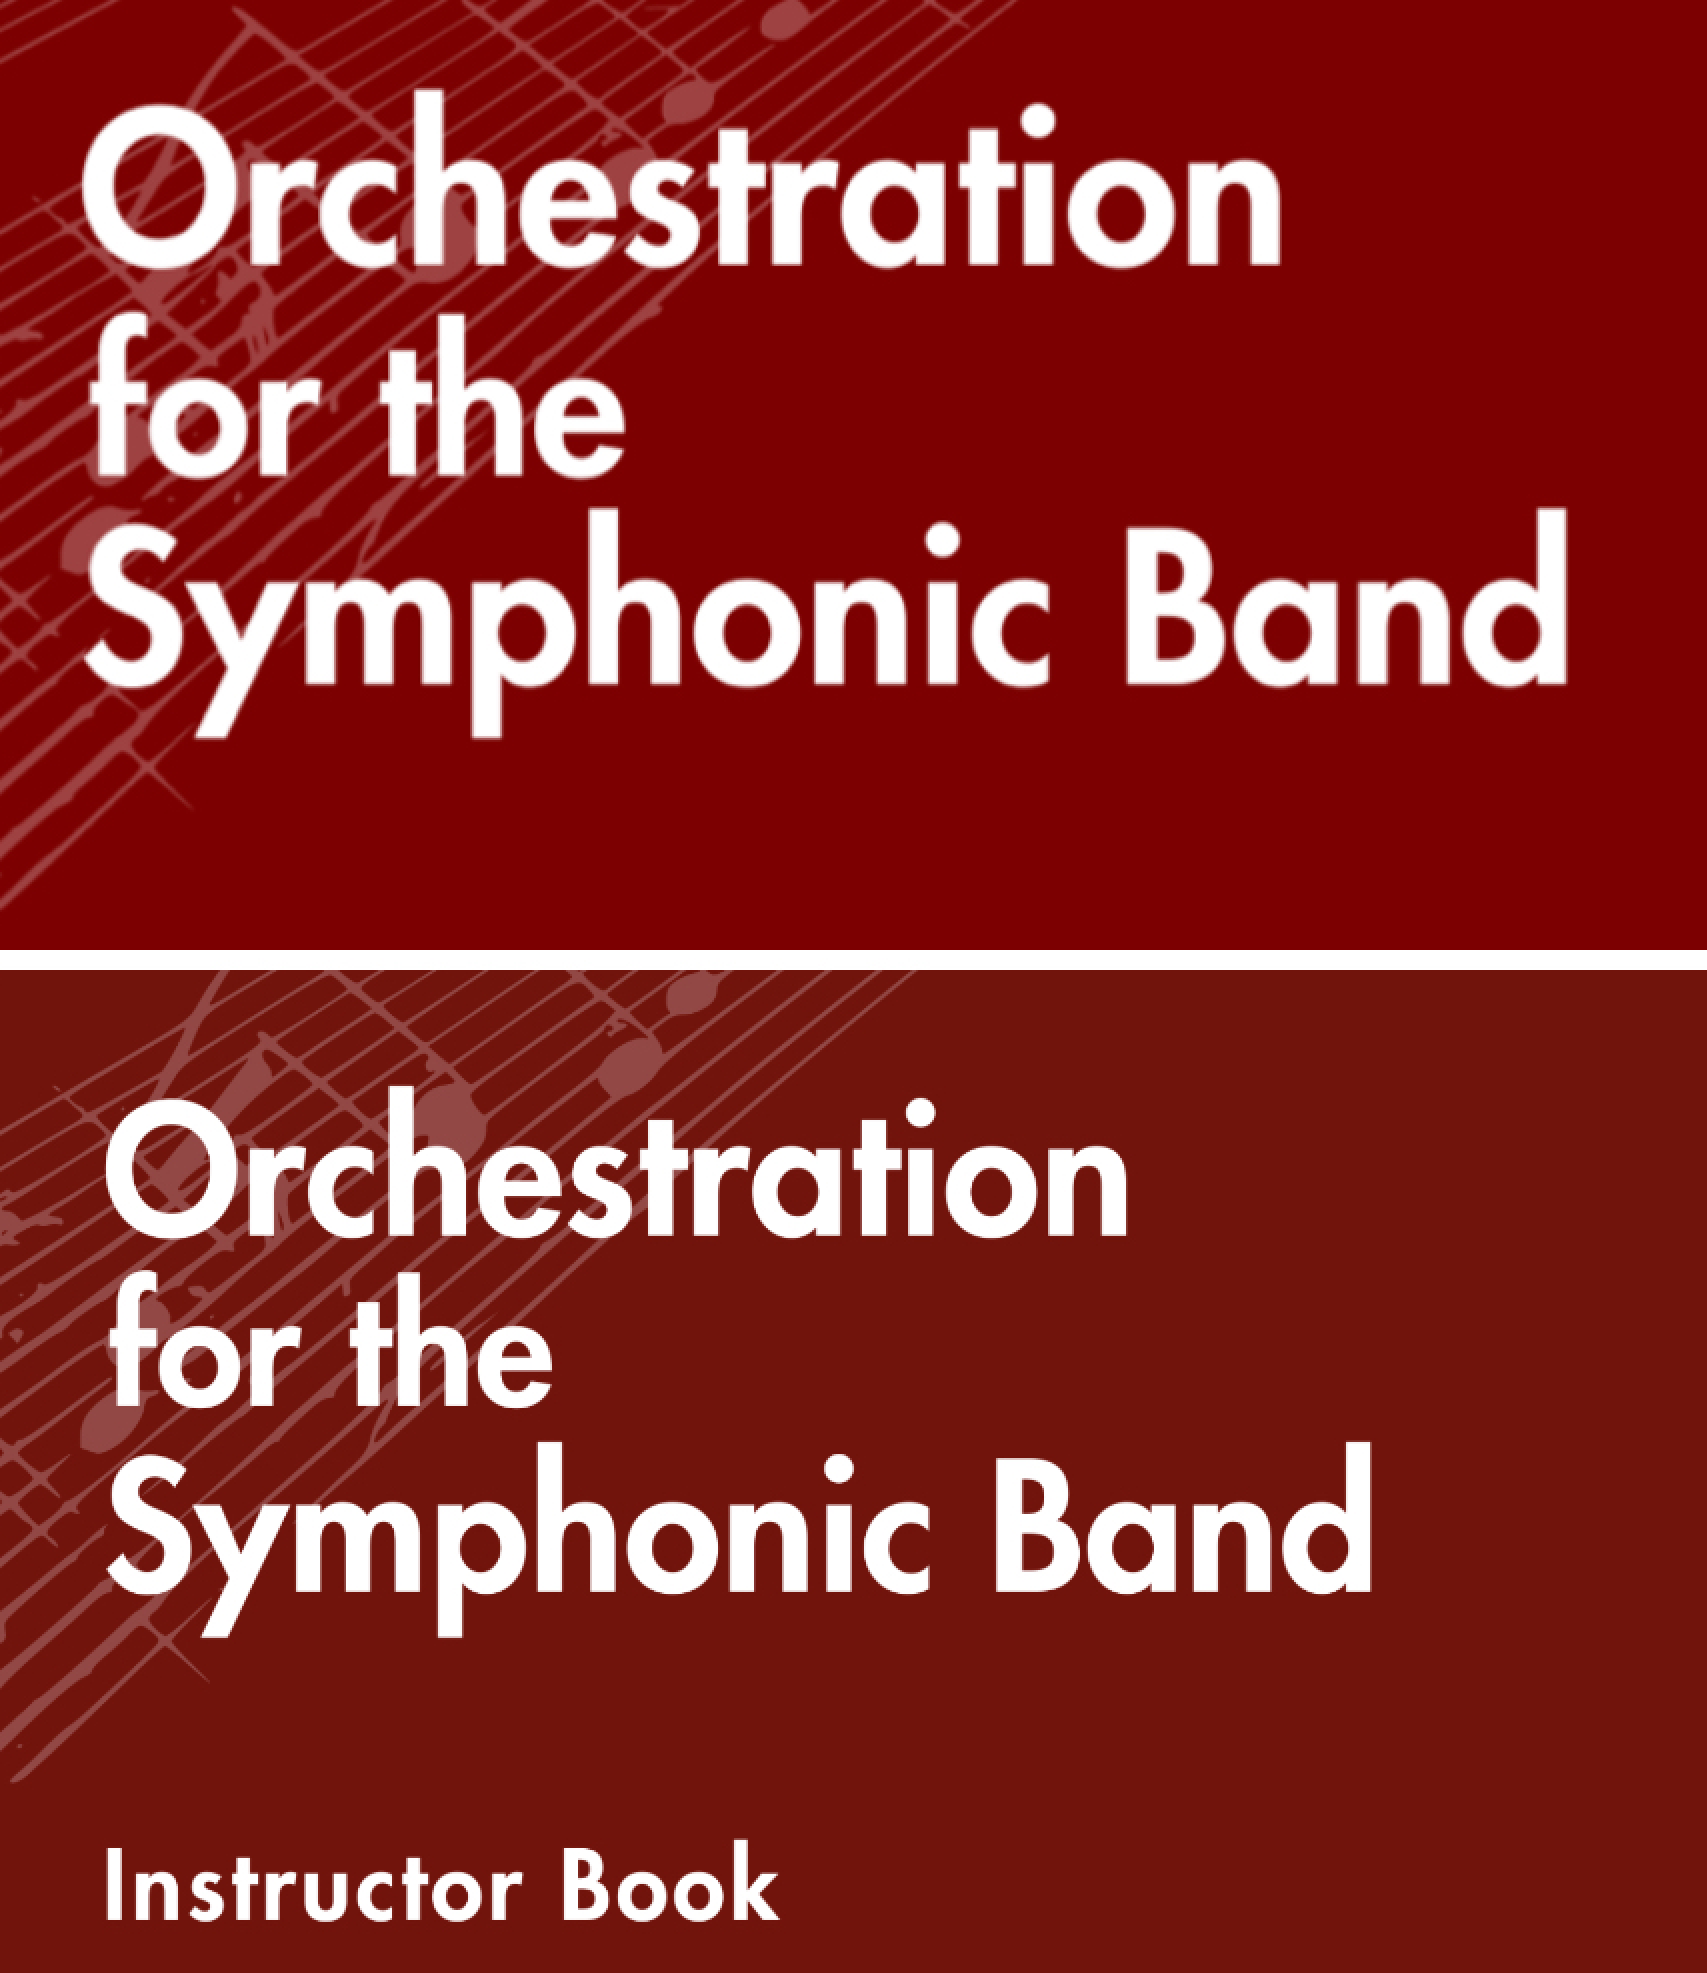 Orchestration For The Symphonic Band (Teacher Bundle) by Kimberly K. Archer